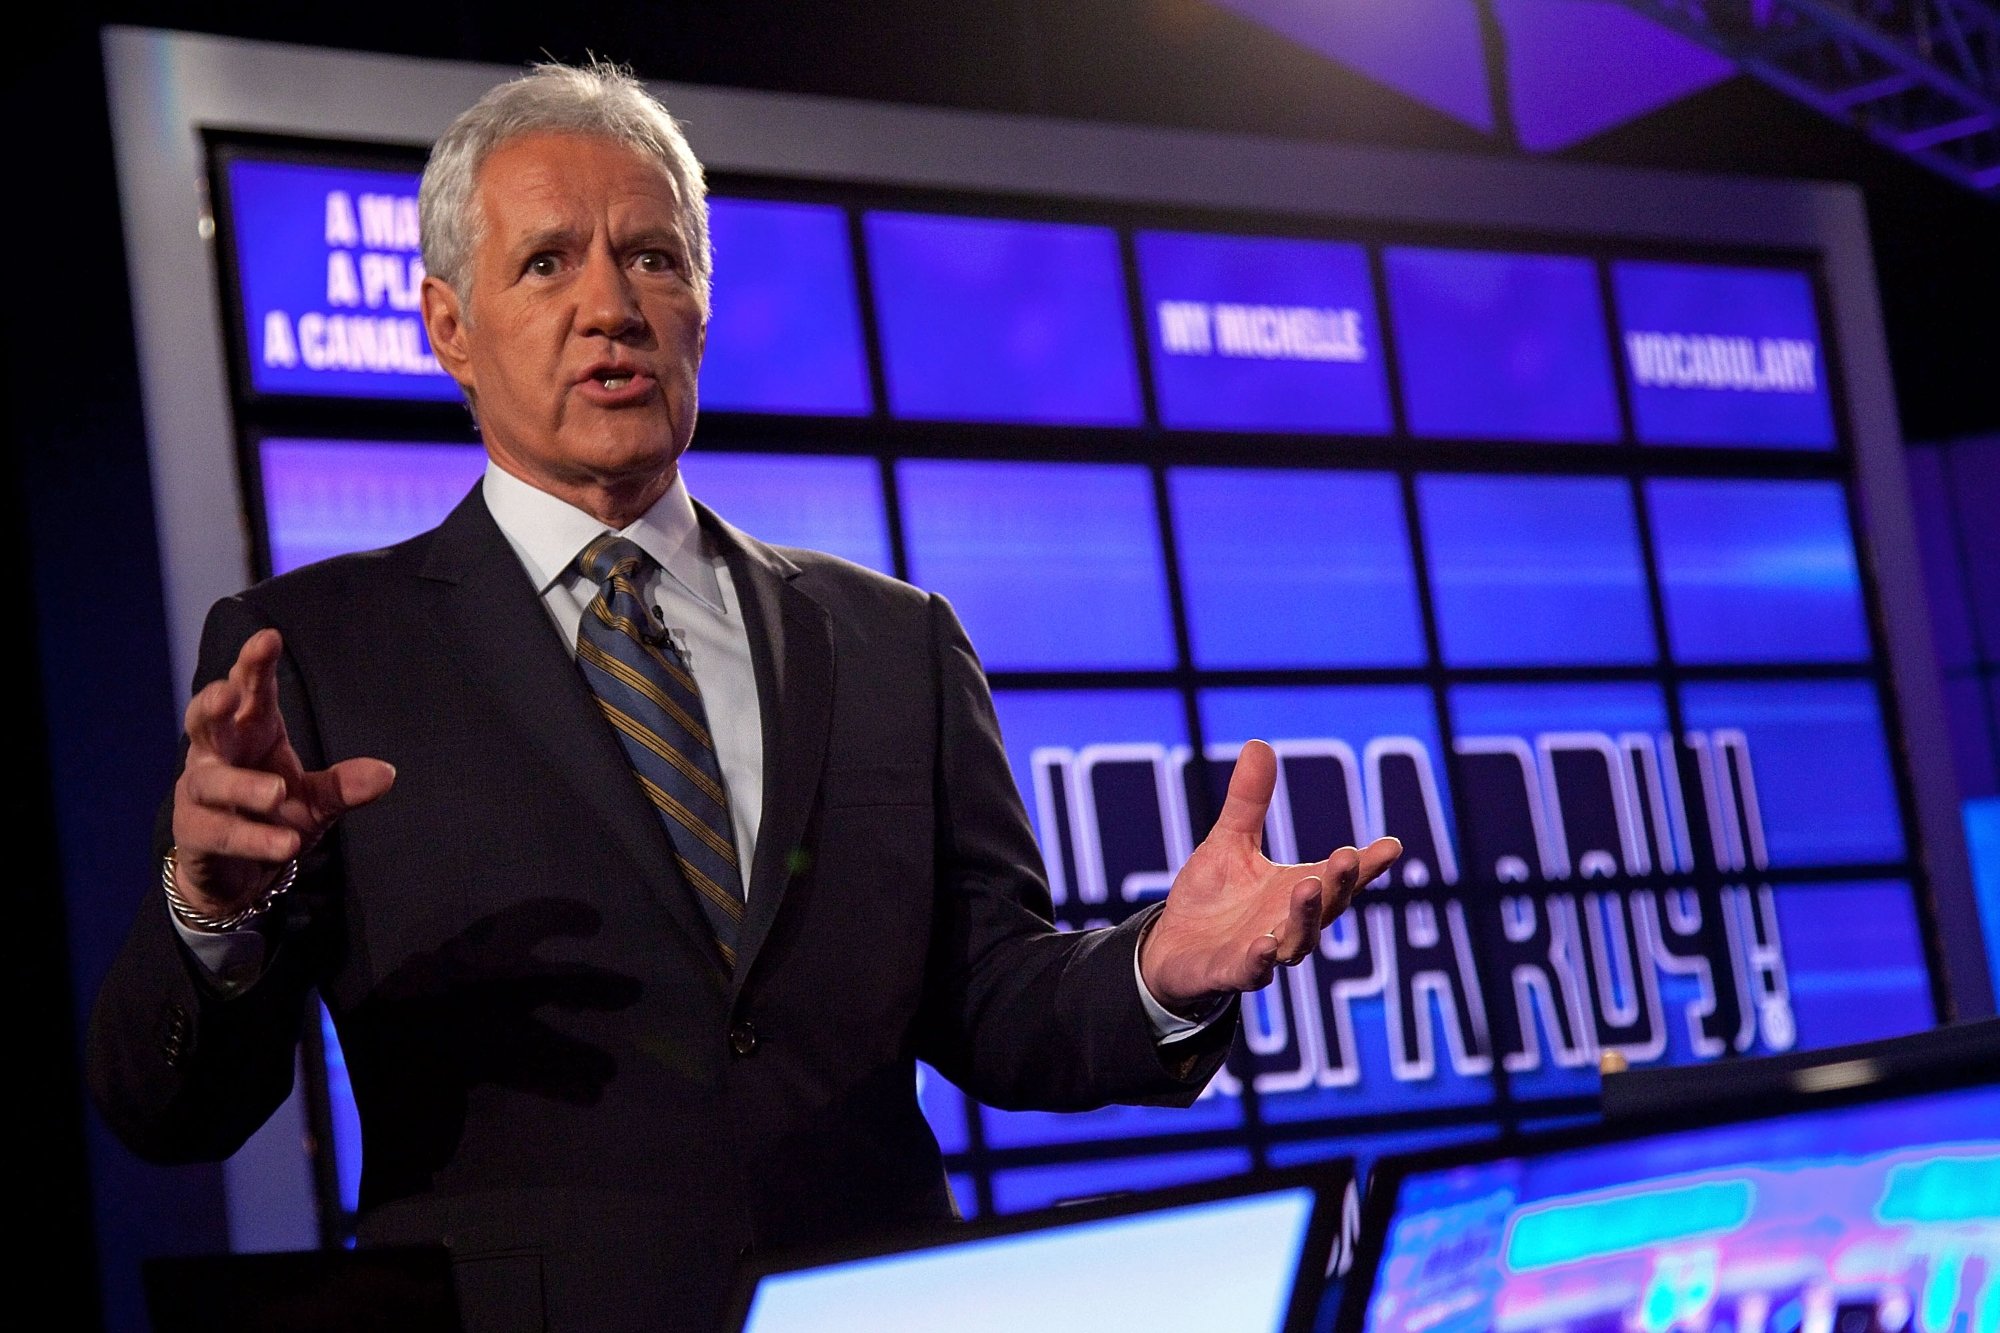 'Jeopardy!' Alex Trebek, speaking in front of the contestant podiums. He's wearing a suit in front of the digital board. He's talking with his hands in the air.